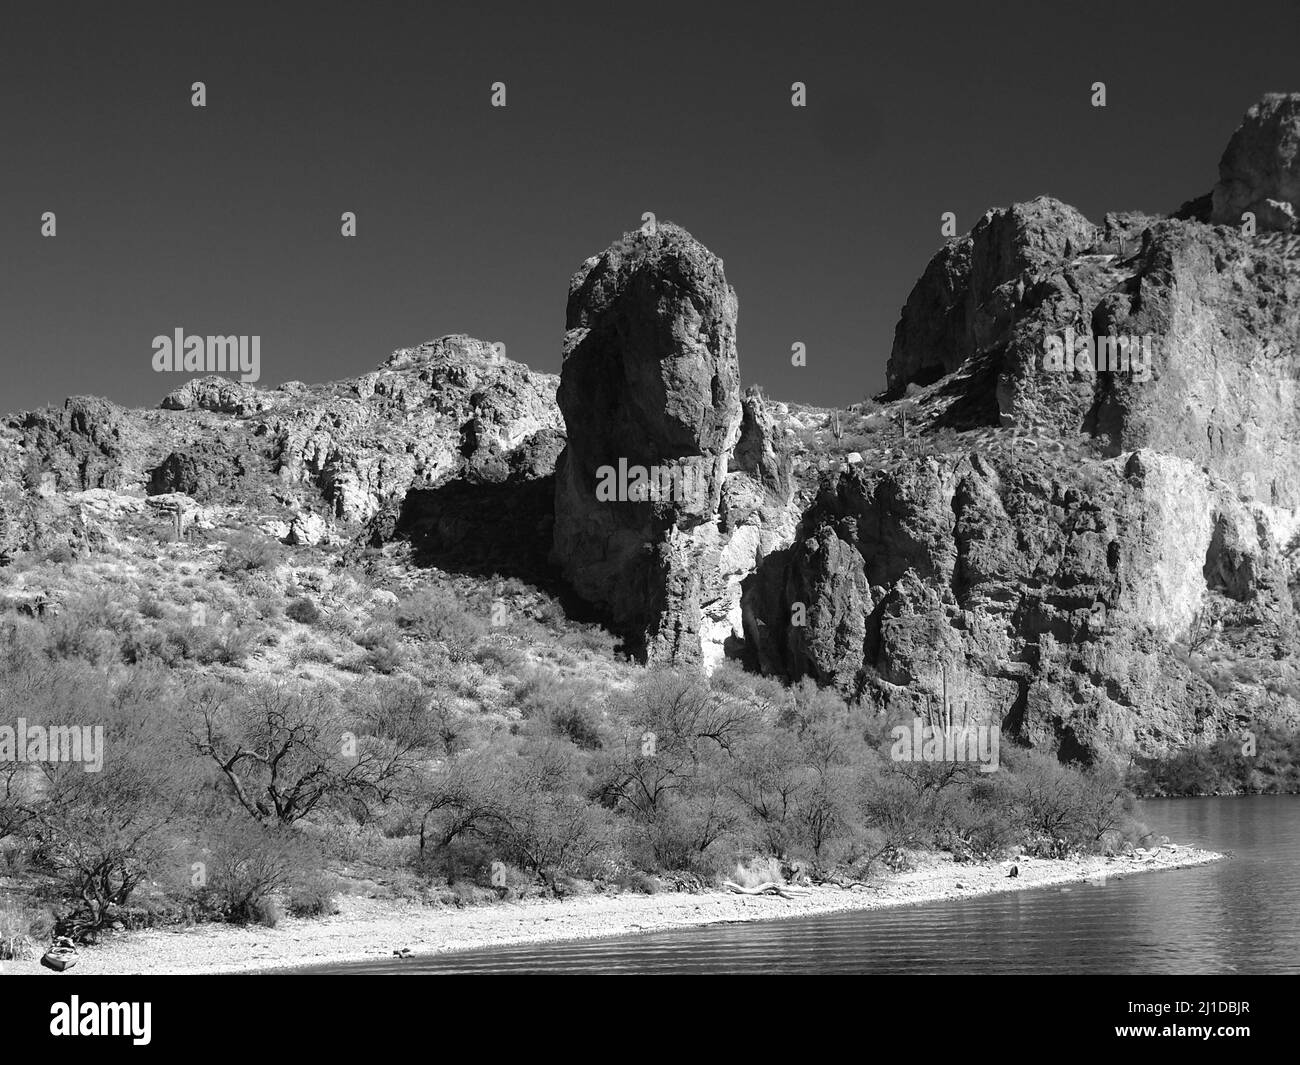 Canyon Lake, Arizona landscapes in color and monotone showing the amazing topography. The lake is surrounded by steep cliffs and majestic vistas. Stock Photo